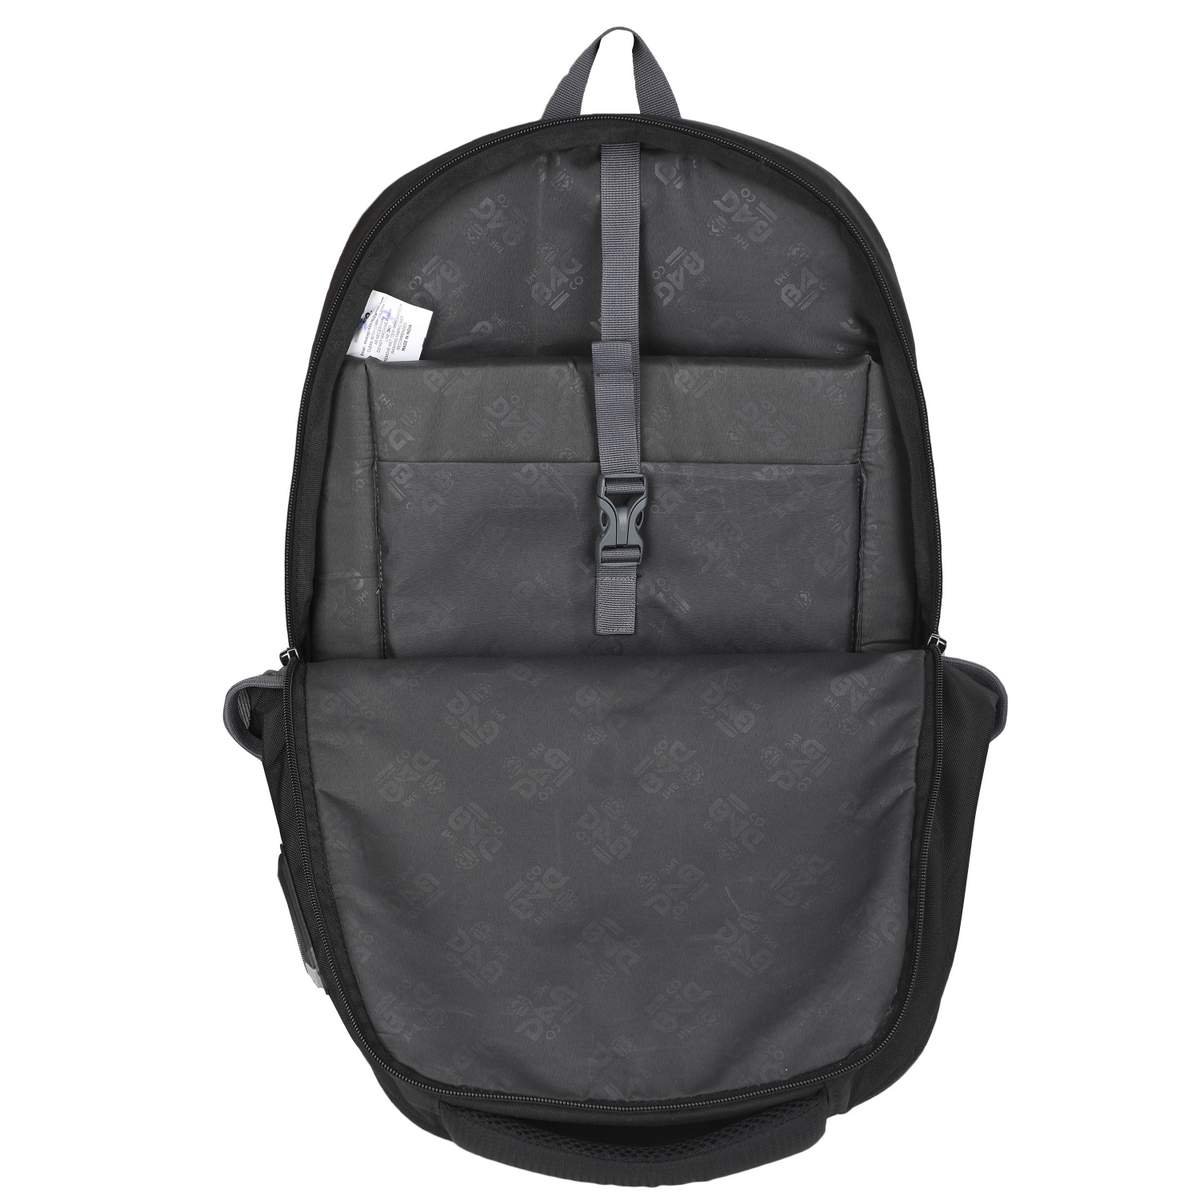 Buy Anti-Theft Urban® Backpack for USD 120.00 | Travelon Bags